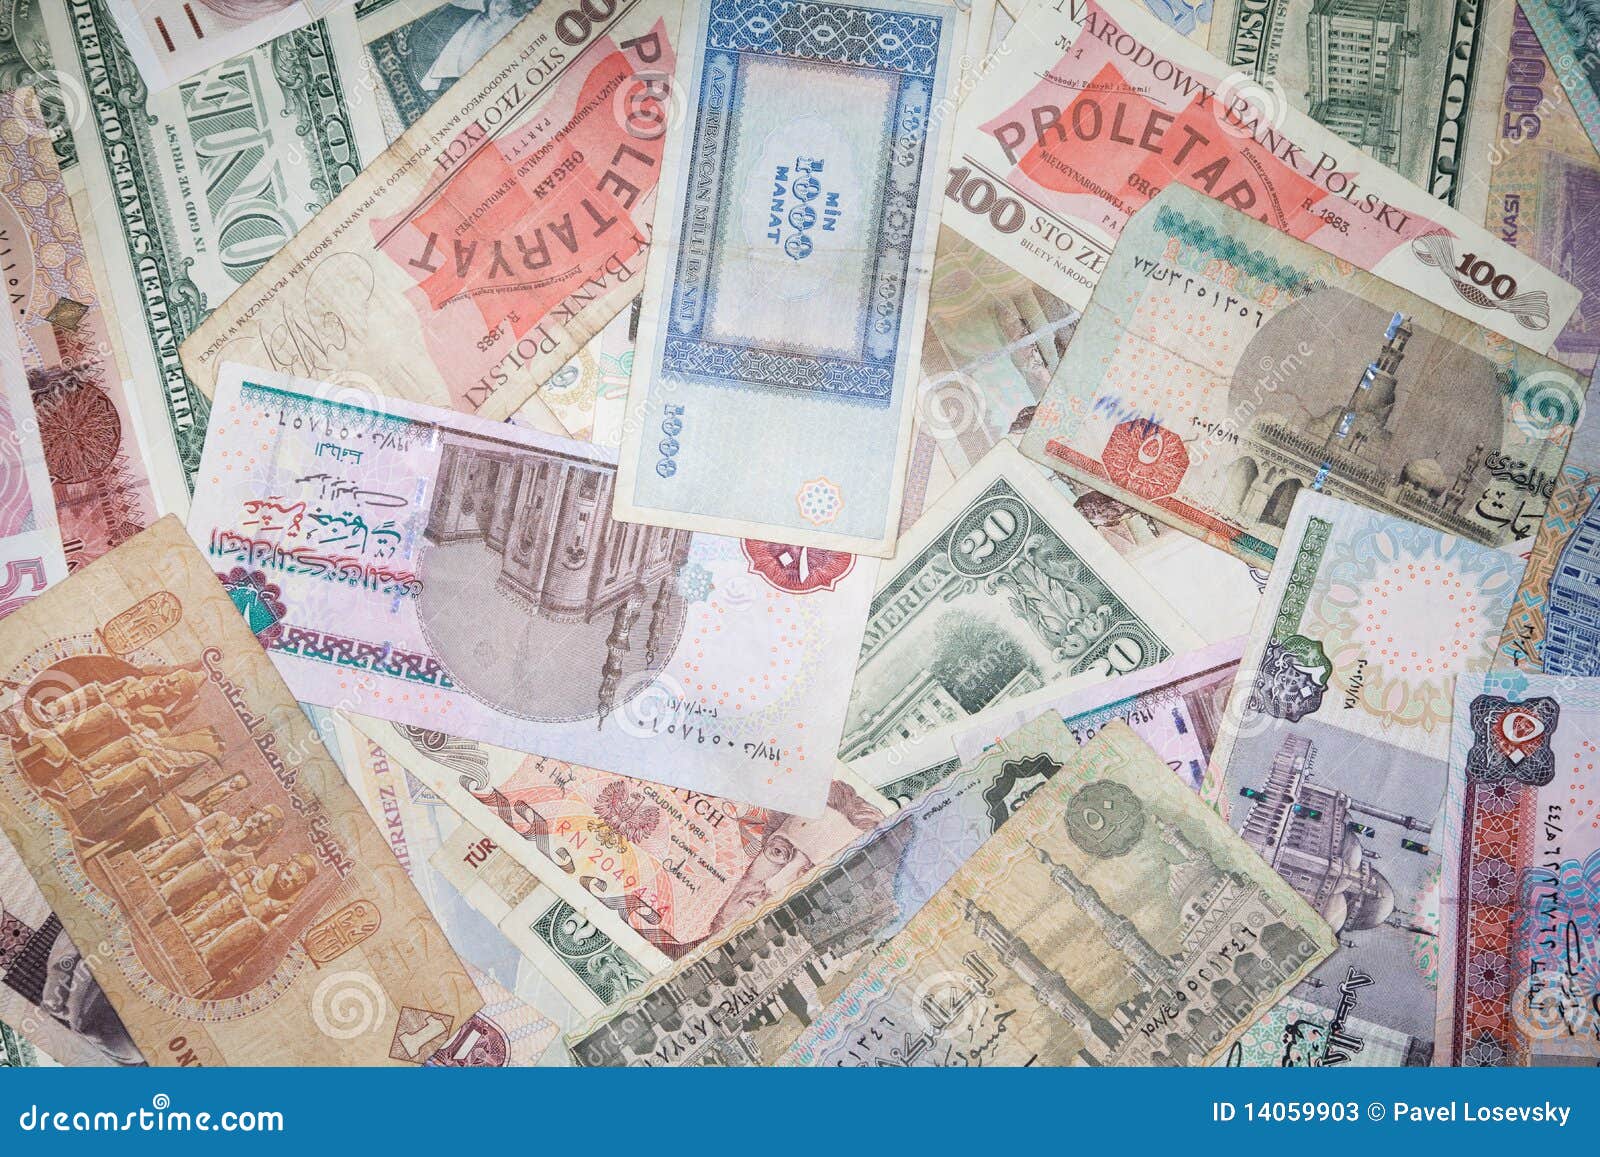 background from banknotes of monetary currencies